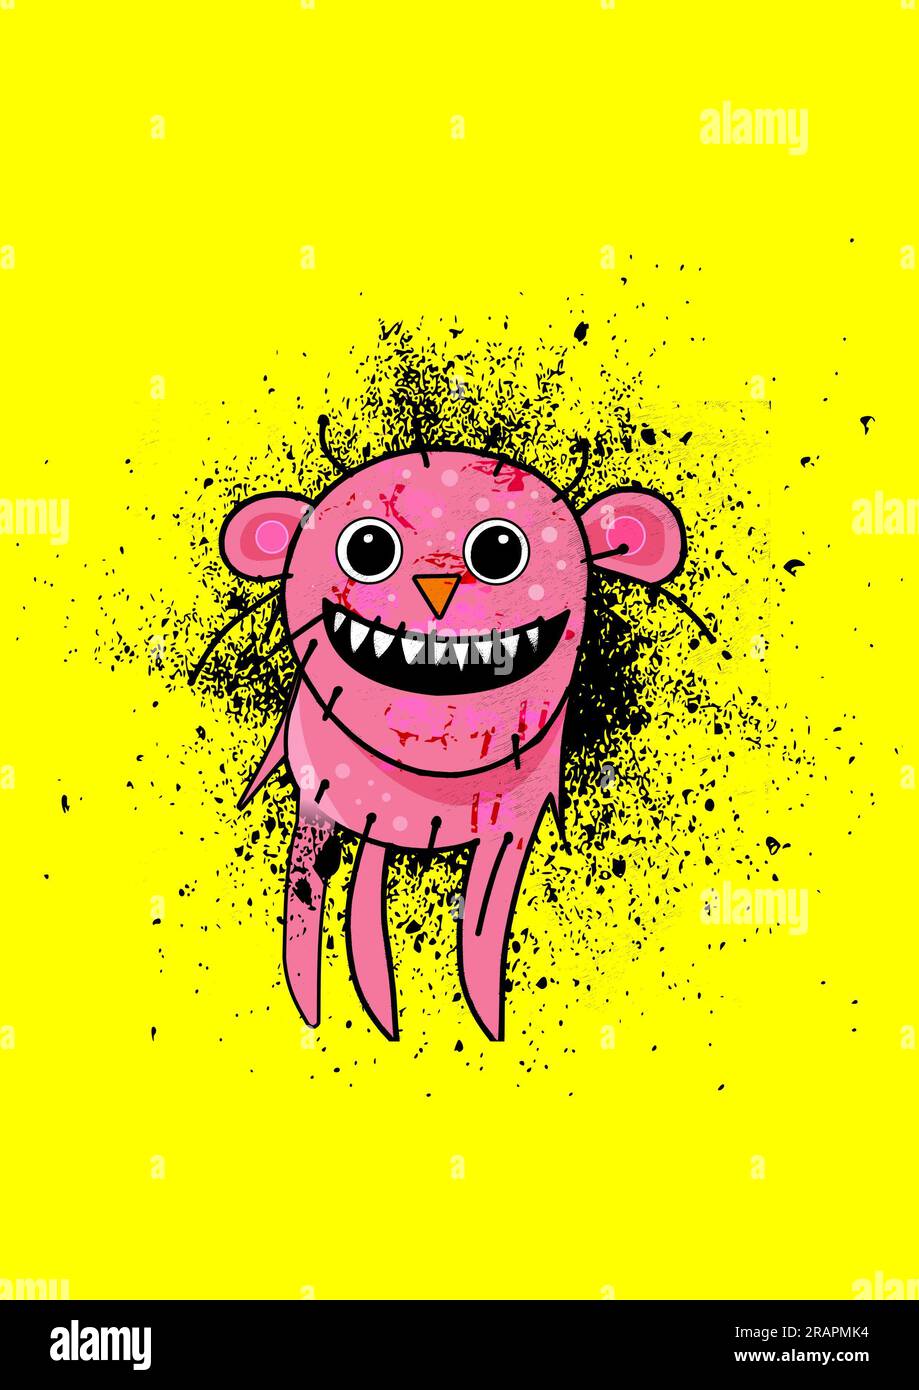 Funny friendly pink red  creature /monster laughing out loud  with  a broad smile on a yellow background Stock Photo